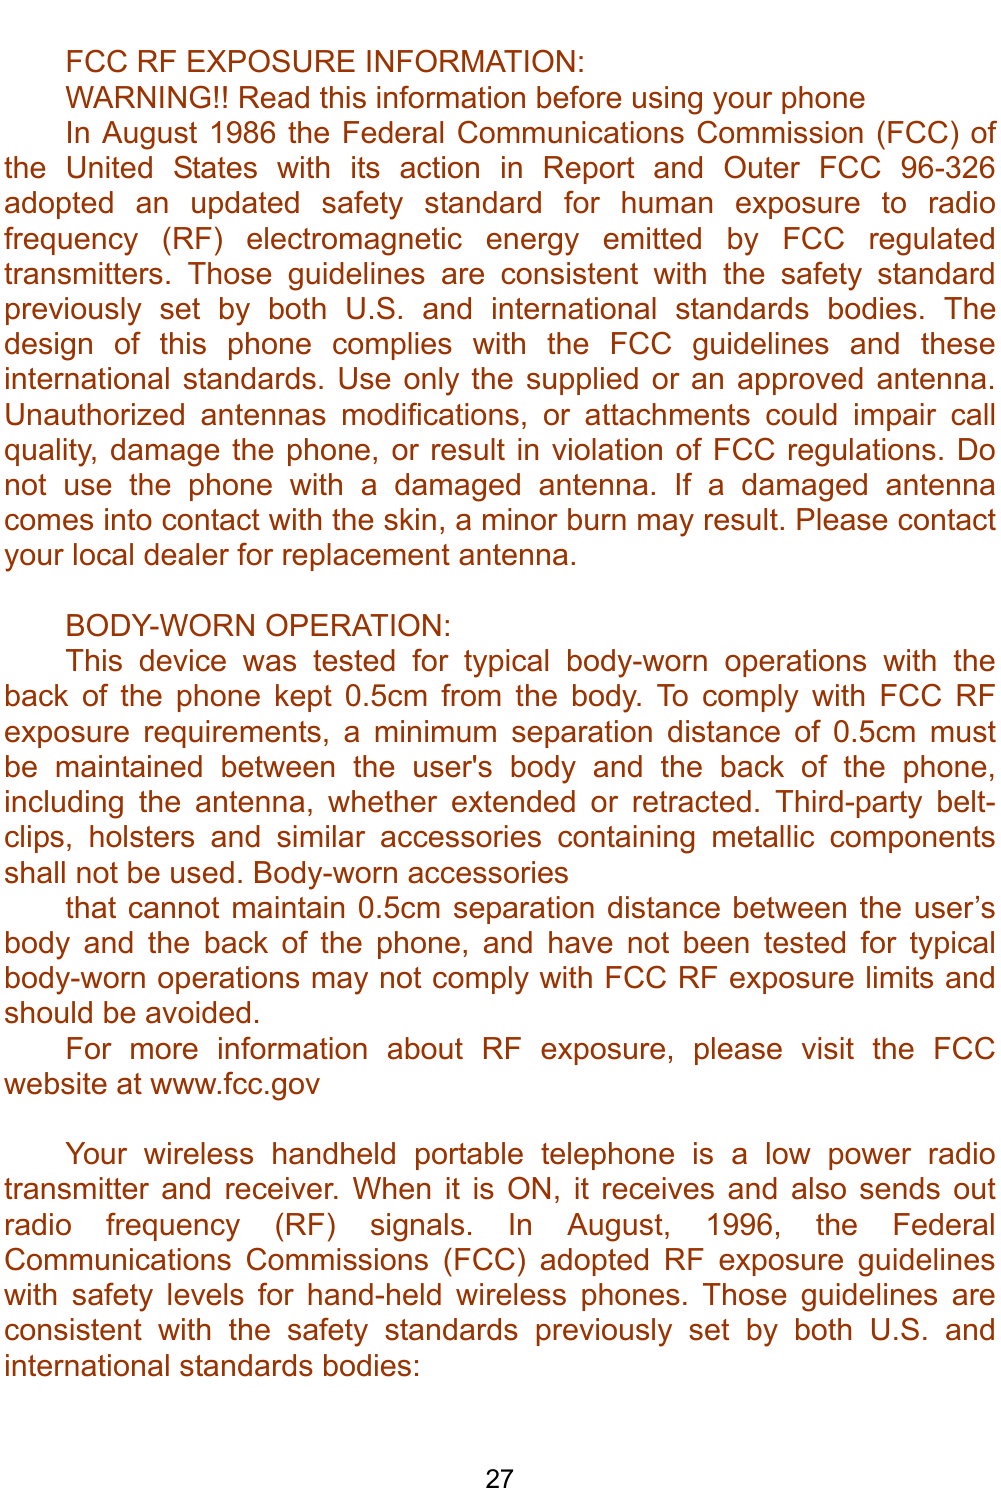    27 FCC RF EXPOSURE INFORMATION: WARNING!! Read this information before using your phone In August 1986 the Federal Communications Commission (FCC) of the United States with its action in Report and Outer FCC 96-326 adopted an updated safety standard for human exposure to radio frequency (RF) electromagnetic energy emitted by FCC regulated transmitters. Those guidelines are consistent with the safety standard previously set by both U.S. and international standards bodies. The design of this phone complies with the FCC guidelines and these international standards. Use only the supplied or an approved antenna. Unauthorized antennas modifications, or attachments could impair call quality, damage the phone, or result in violation of FCC regulations. Do not use the phone with a damaged antenna. If a damaged antenna comes into contact with the skin, a minor burn may result. Please contact your local dealer for replacement antenna.  BODY-WORN OPERATION: This device was tested for typical body-worn operations with the back of the phone kept 0.5cm from the body. To comply with FCC RF exposure requirements, a minimum separation distance of 0.5cm must be maintained between the user&apos;s body and the back of the phone, including the antenna, whether extended or retracted. Third-party belt-clips, holsters and similar accessories containing metallic components shall not be used. Body-worn accessories that cannot maintain 0.5cm separation distance between the user’s body and the back of the phone, and have not been tested for typical body-worn operations may not comply with FCC RF exposure limits and should be avoided. For more information about RF exposure, please visit the FCC website at www.fcc.gov  Your wireless handheld portable telephone is a low power radio transmitter and receiver. When it is ON, it receives and also sends out radio frequency (RF) signals. In August, 1996, the Federal Communications Commissions (FCC) adopted RF exposure guidelines with safety levels for hand-held wireless phones. Those guidelines are consistent with the safety standards previously set by both U.S. and international standards bodies:  